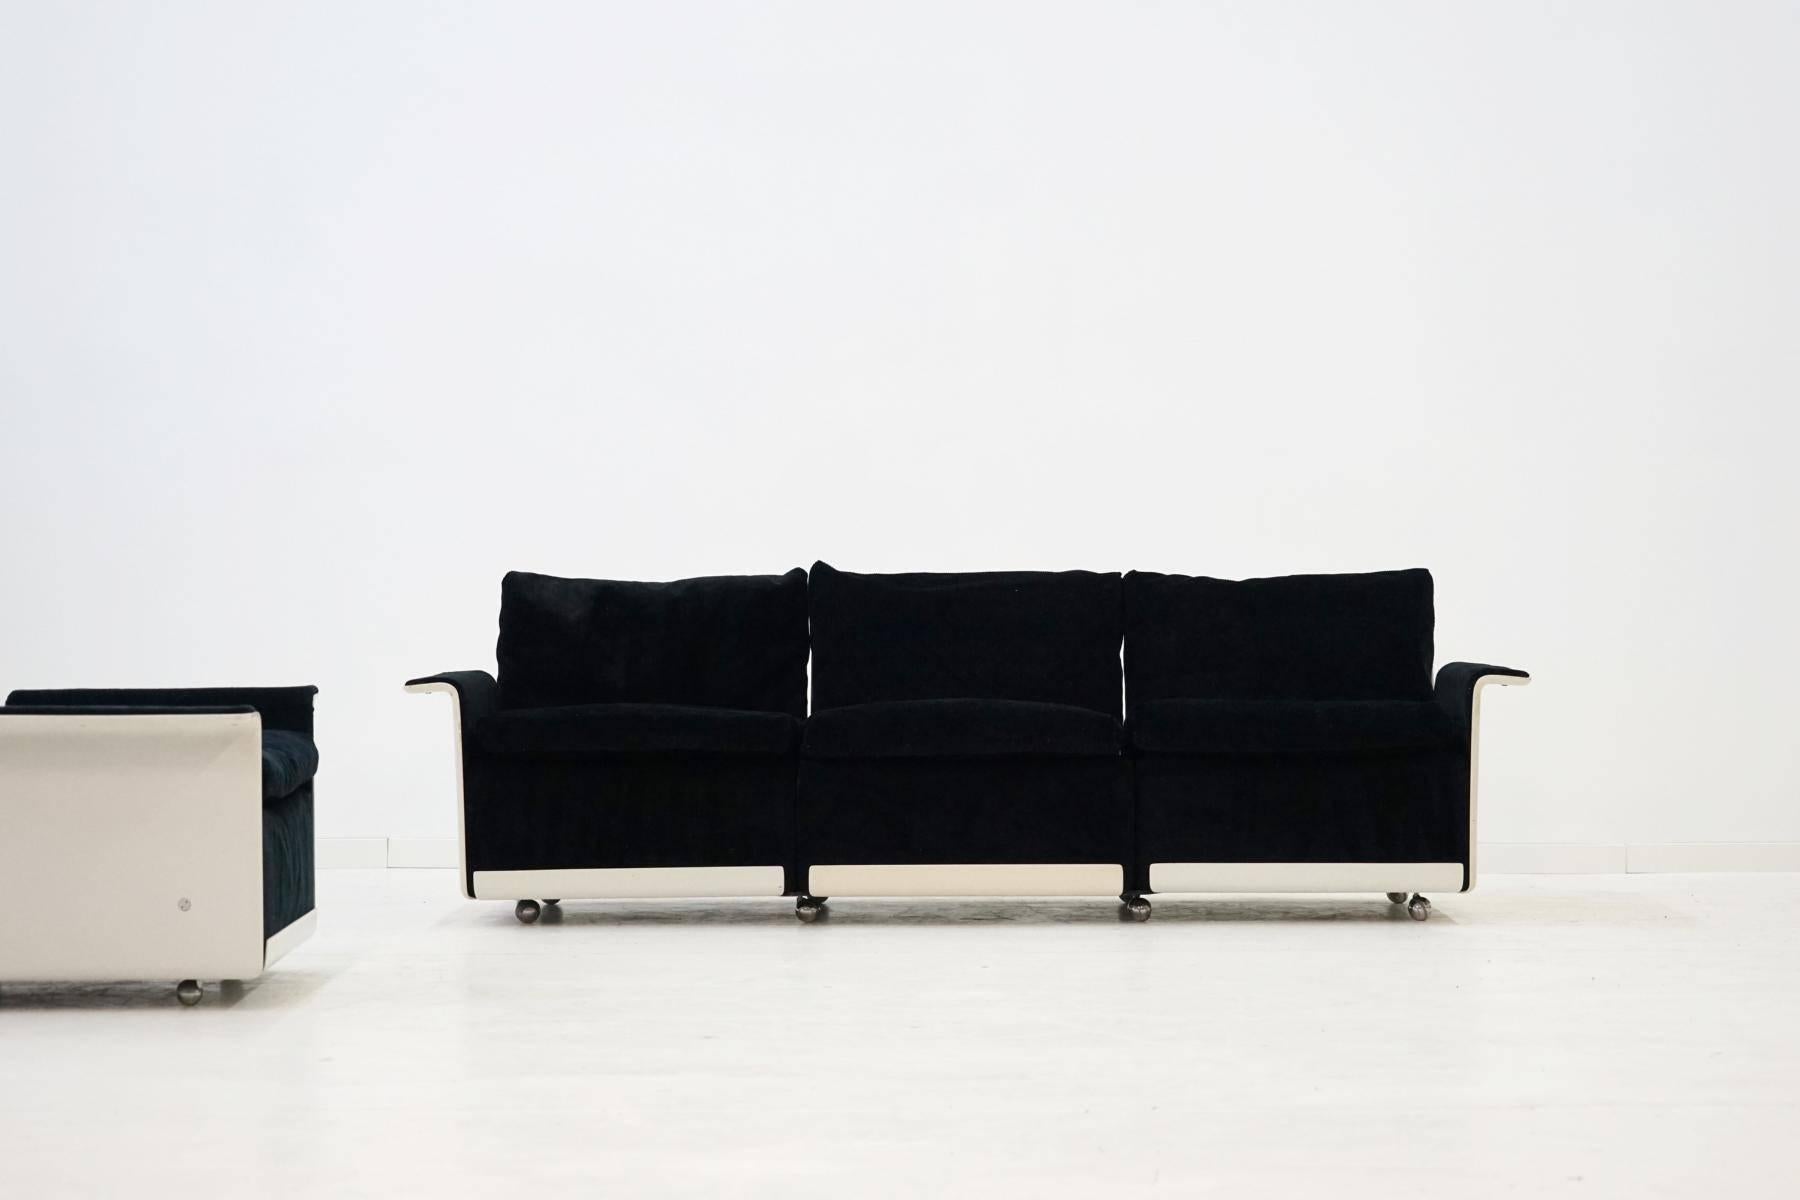 German Three-Seat Sofa and Armchairs by Dieter Rams for Vitsoe, RZ 62 620